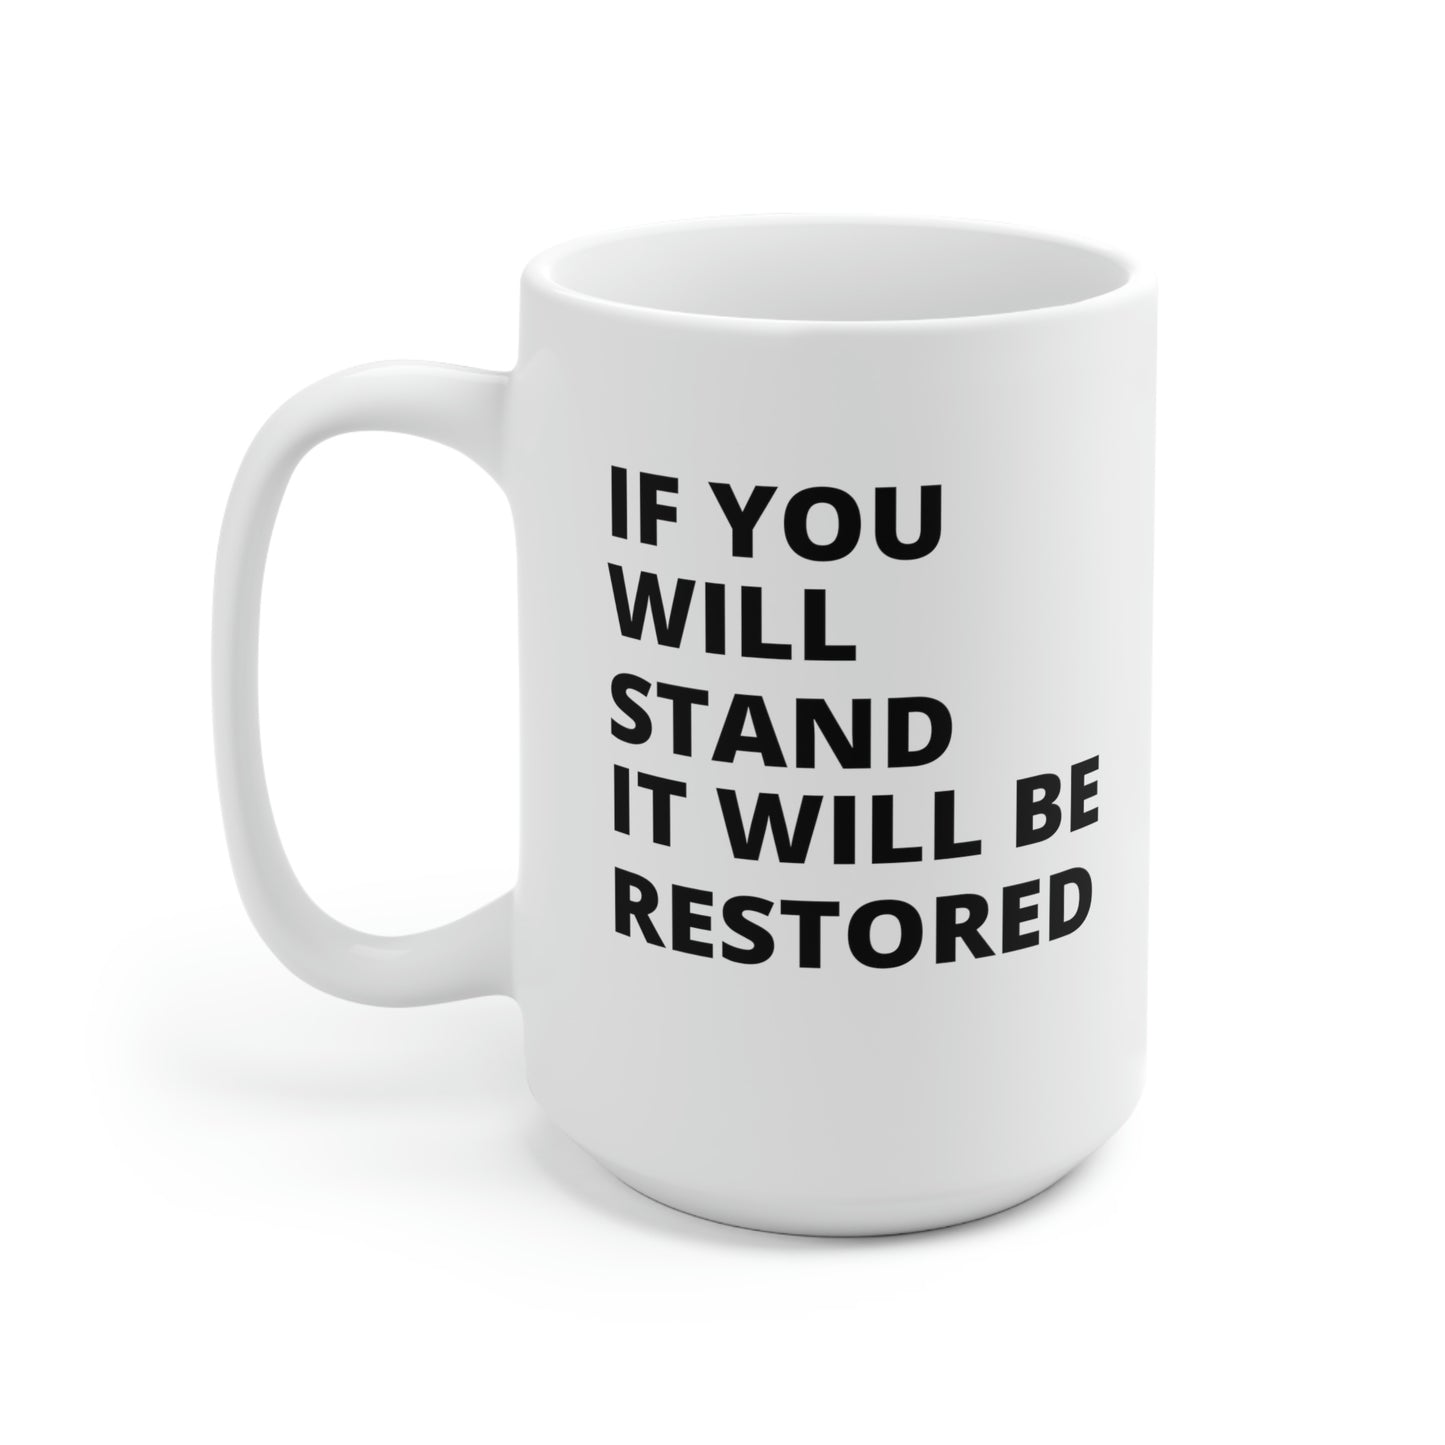 "If You Stand It Will Be Restored" Ceramic Mug